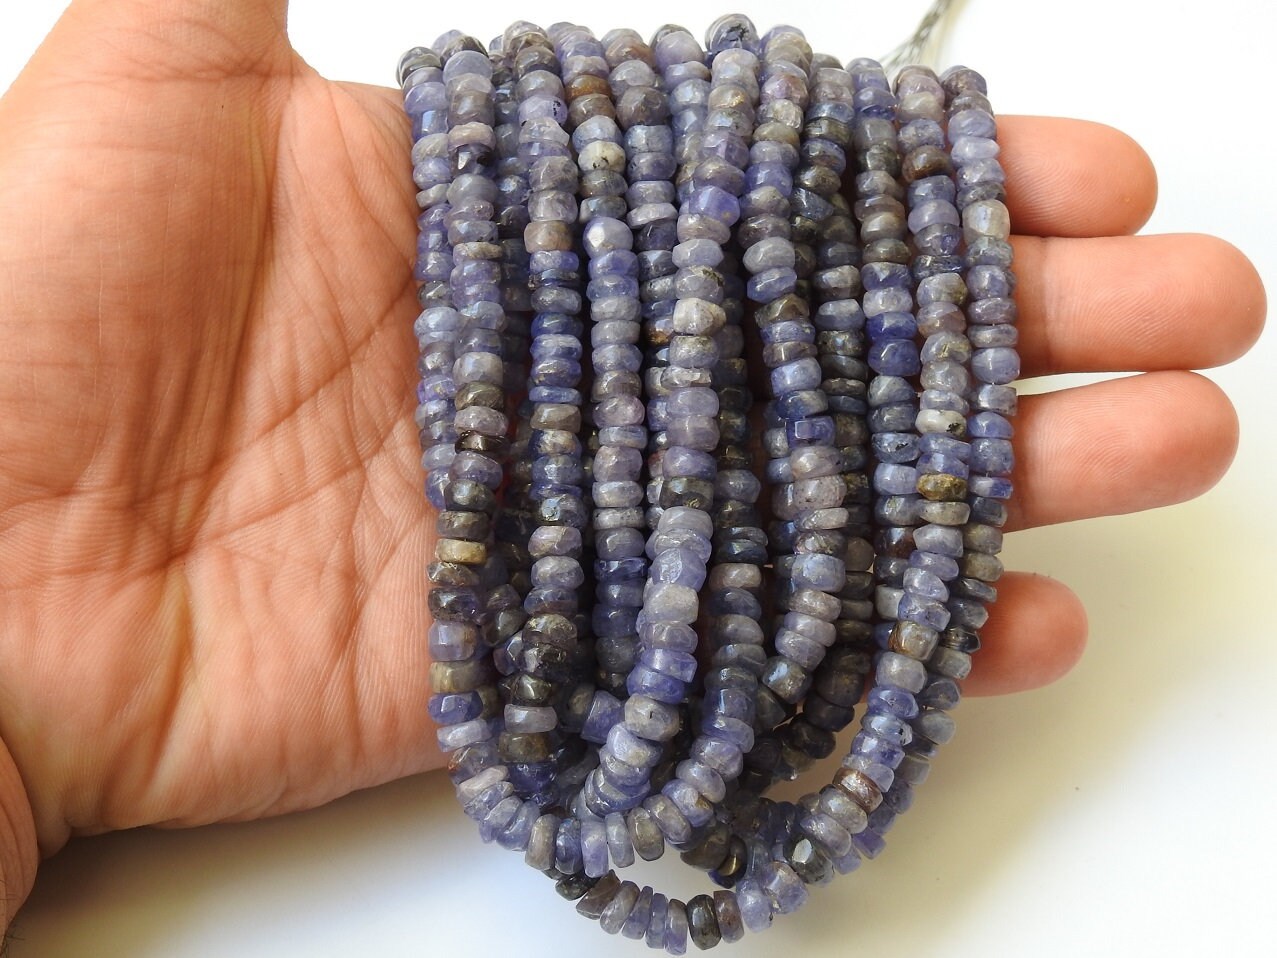 Tanzanite Smooth Roundel Beads,Loose Stone,Handmade,For Making Jewelry,Wholesale Price,New Arrival,16Inch Strand,100%Natural B8 | Save 33% - Rajasthan Living 14